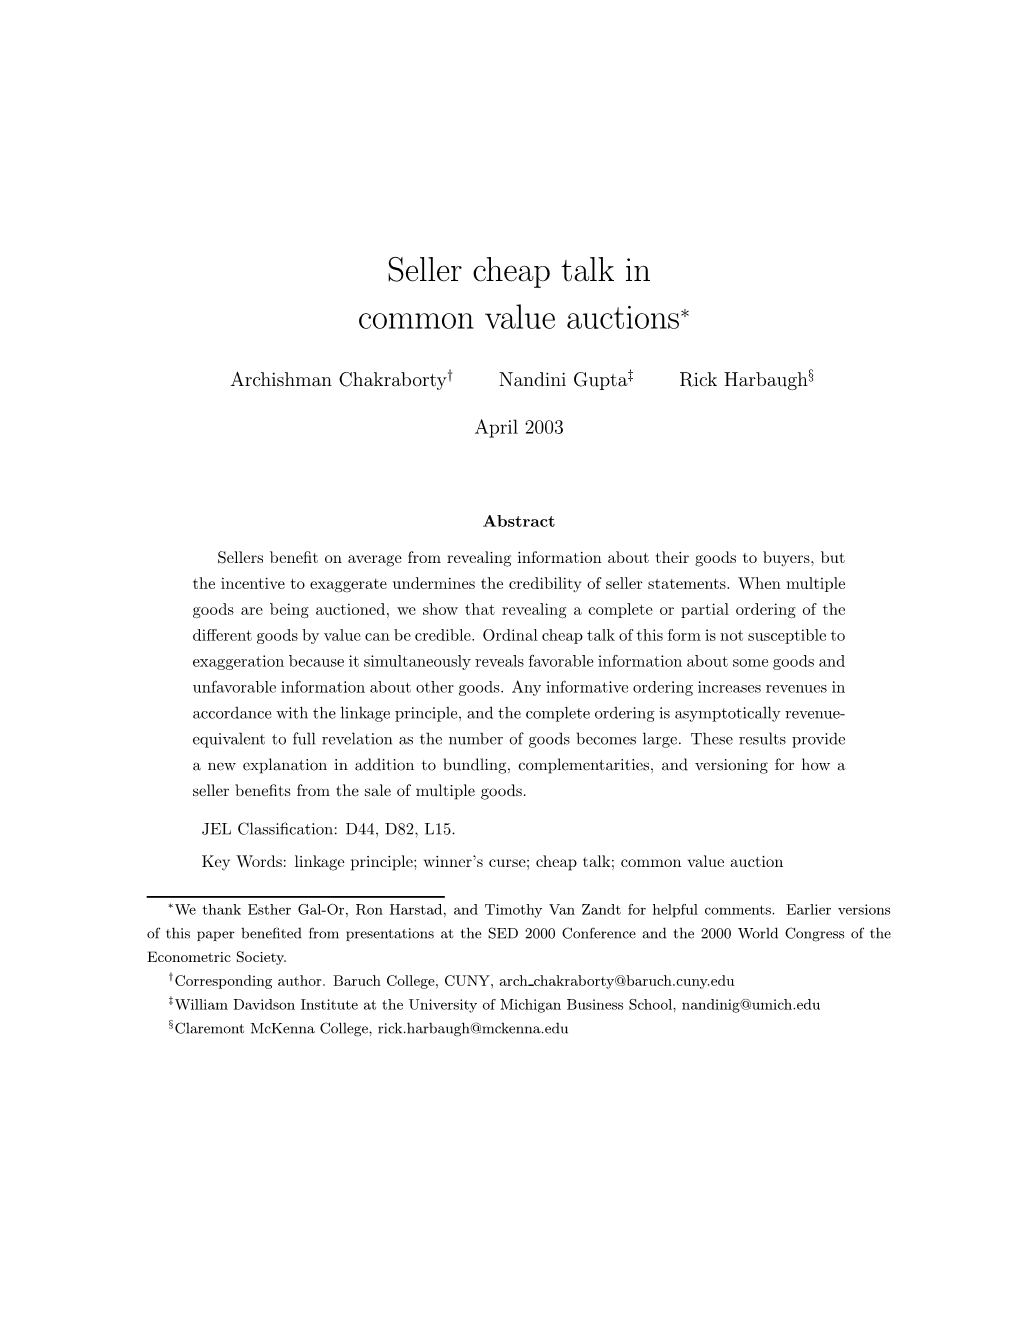 Seller Cheap Talk in Common Value Auctions∗